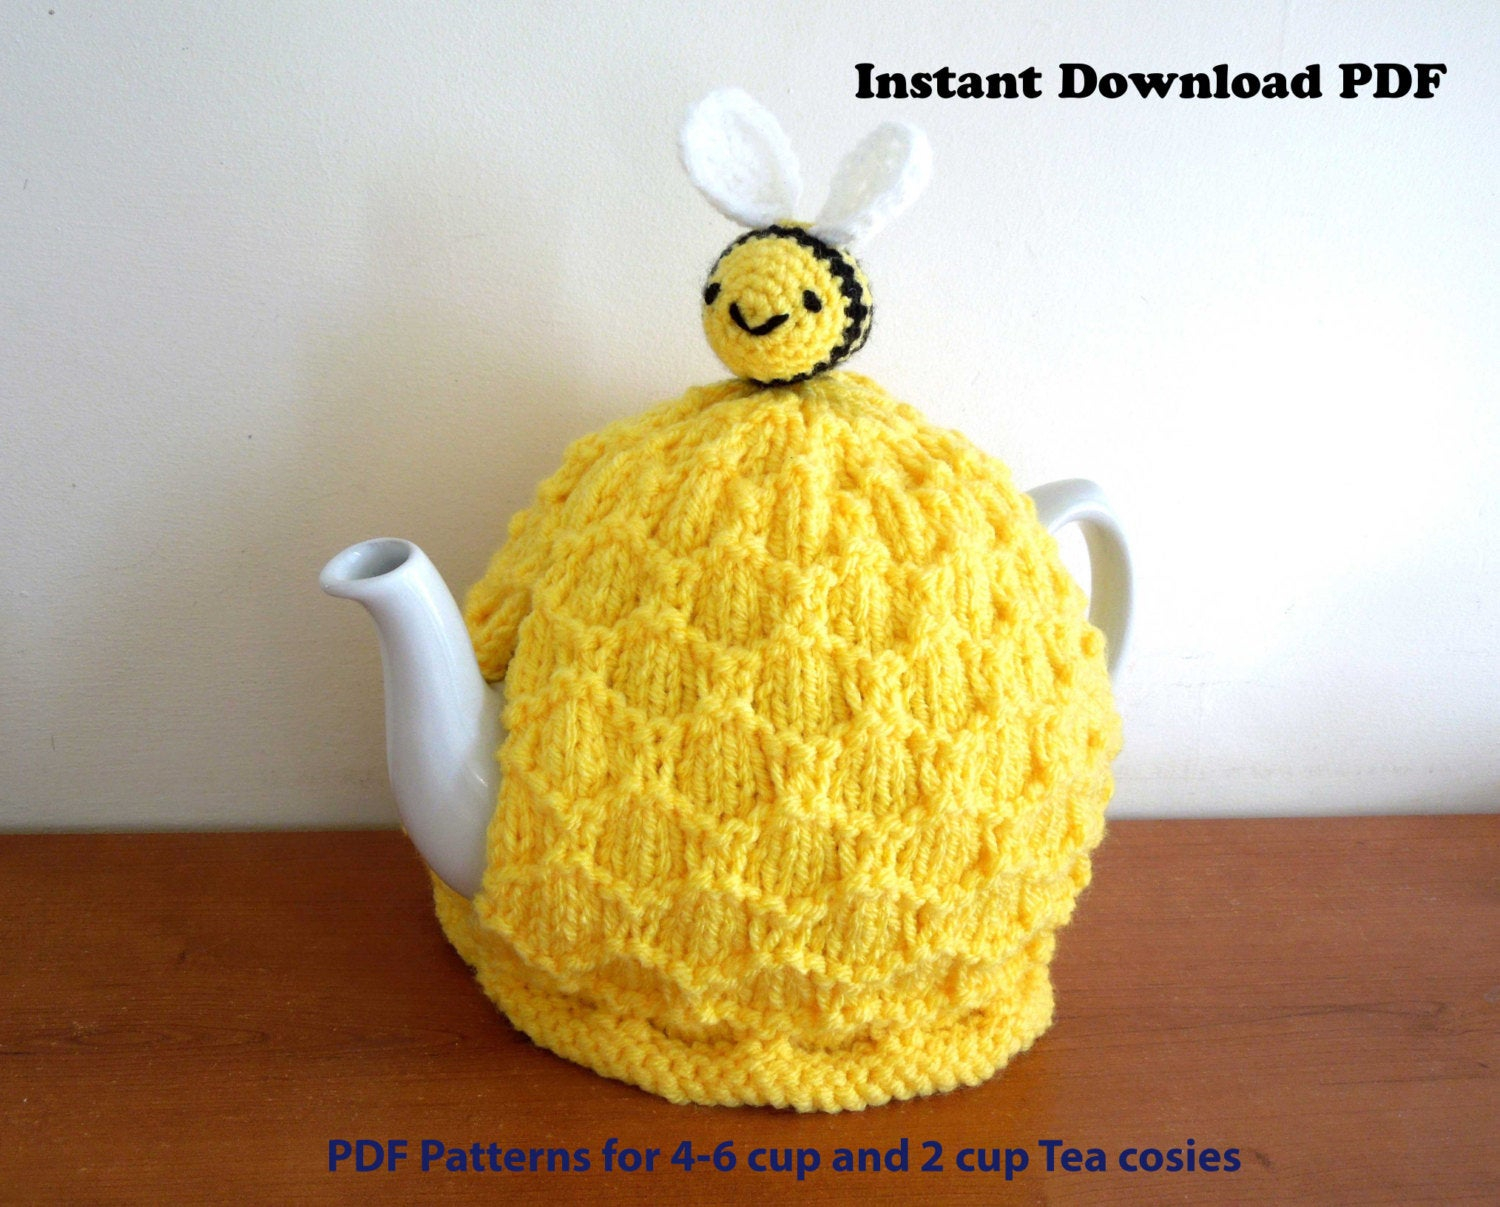 Tea Cosy Patterns To Knit Beehive Tea Cosy Knitting Pattern Only For 4 6 Cup 2 Pt 40 Fl Oz Standard Teapot And Small 2 Cup 450ml Teapot And Bee Pattern